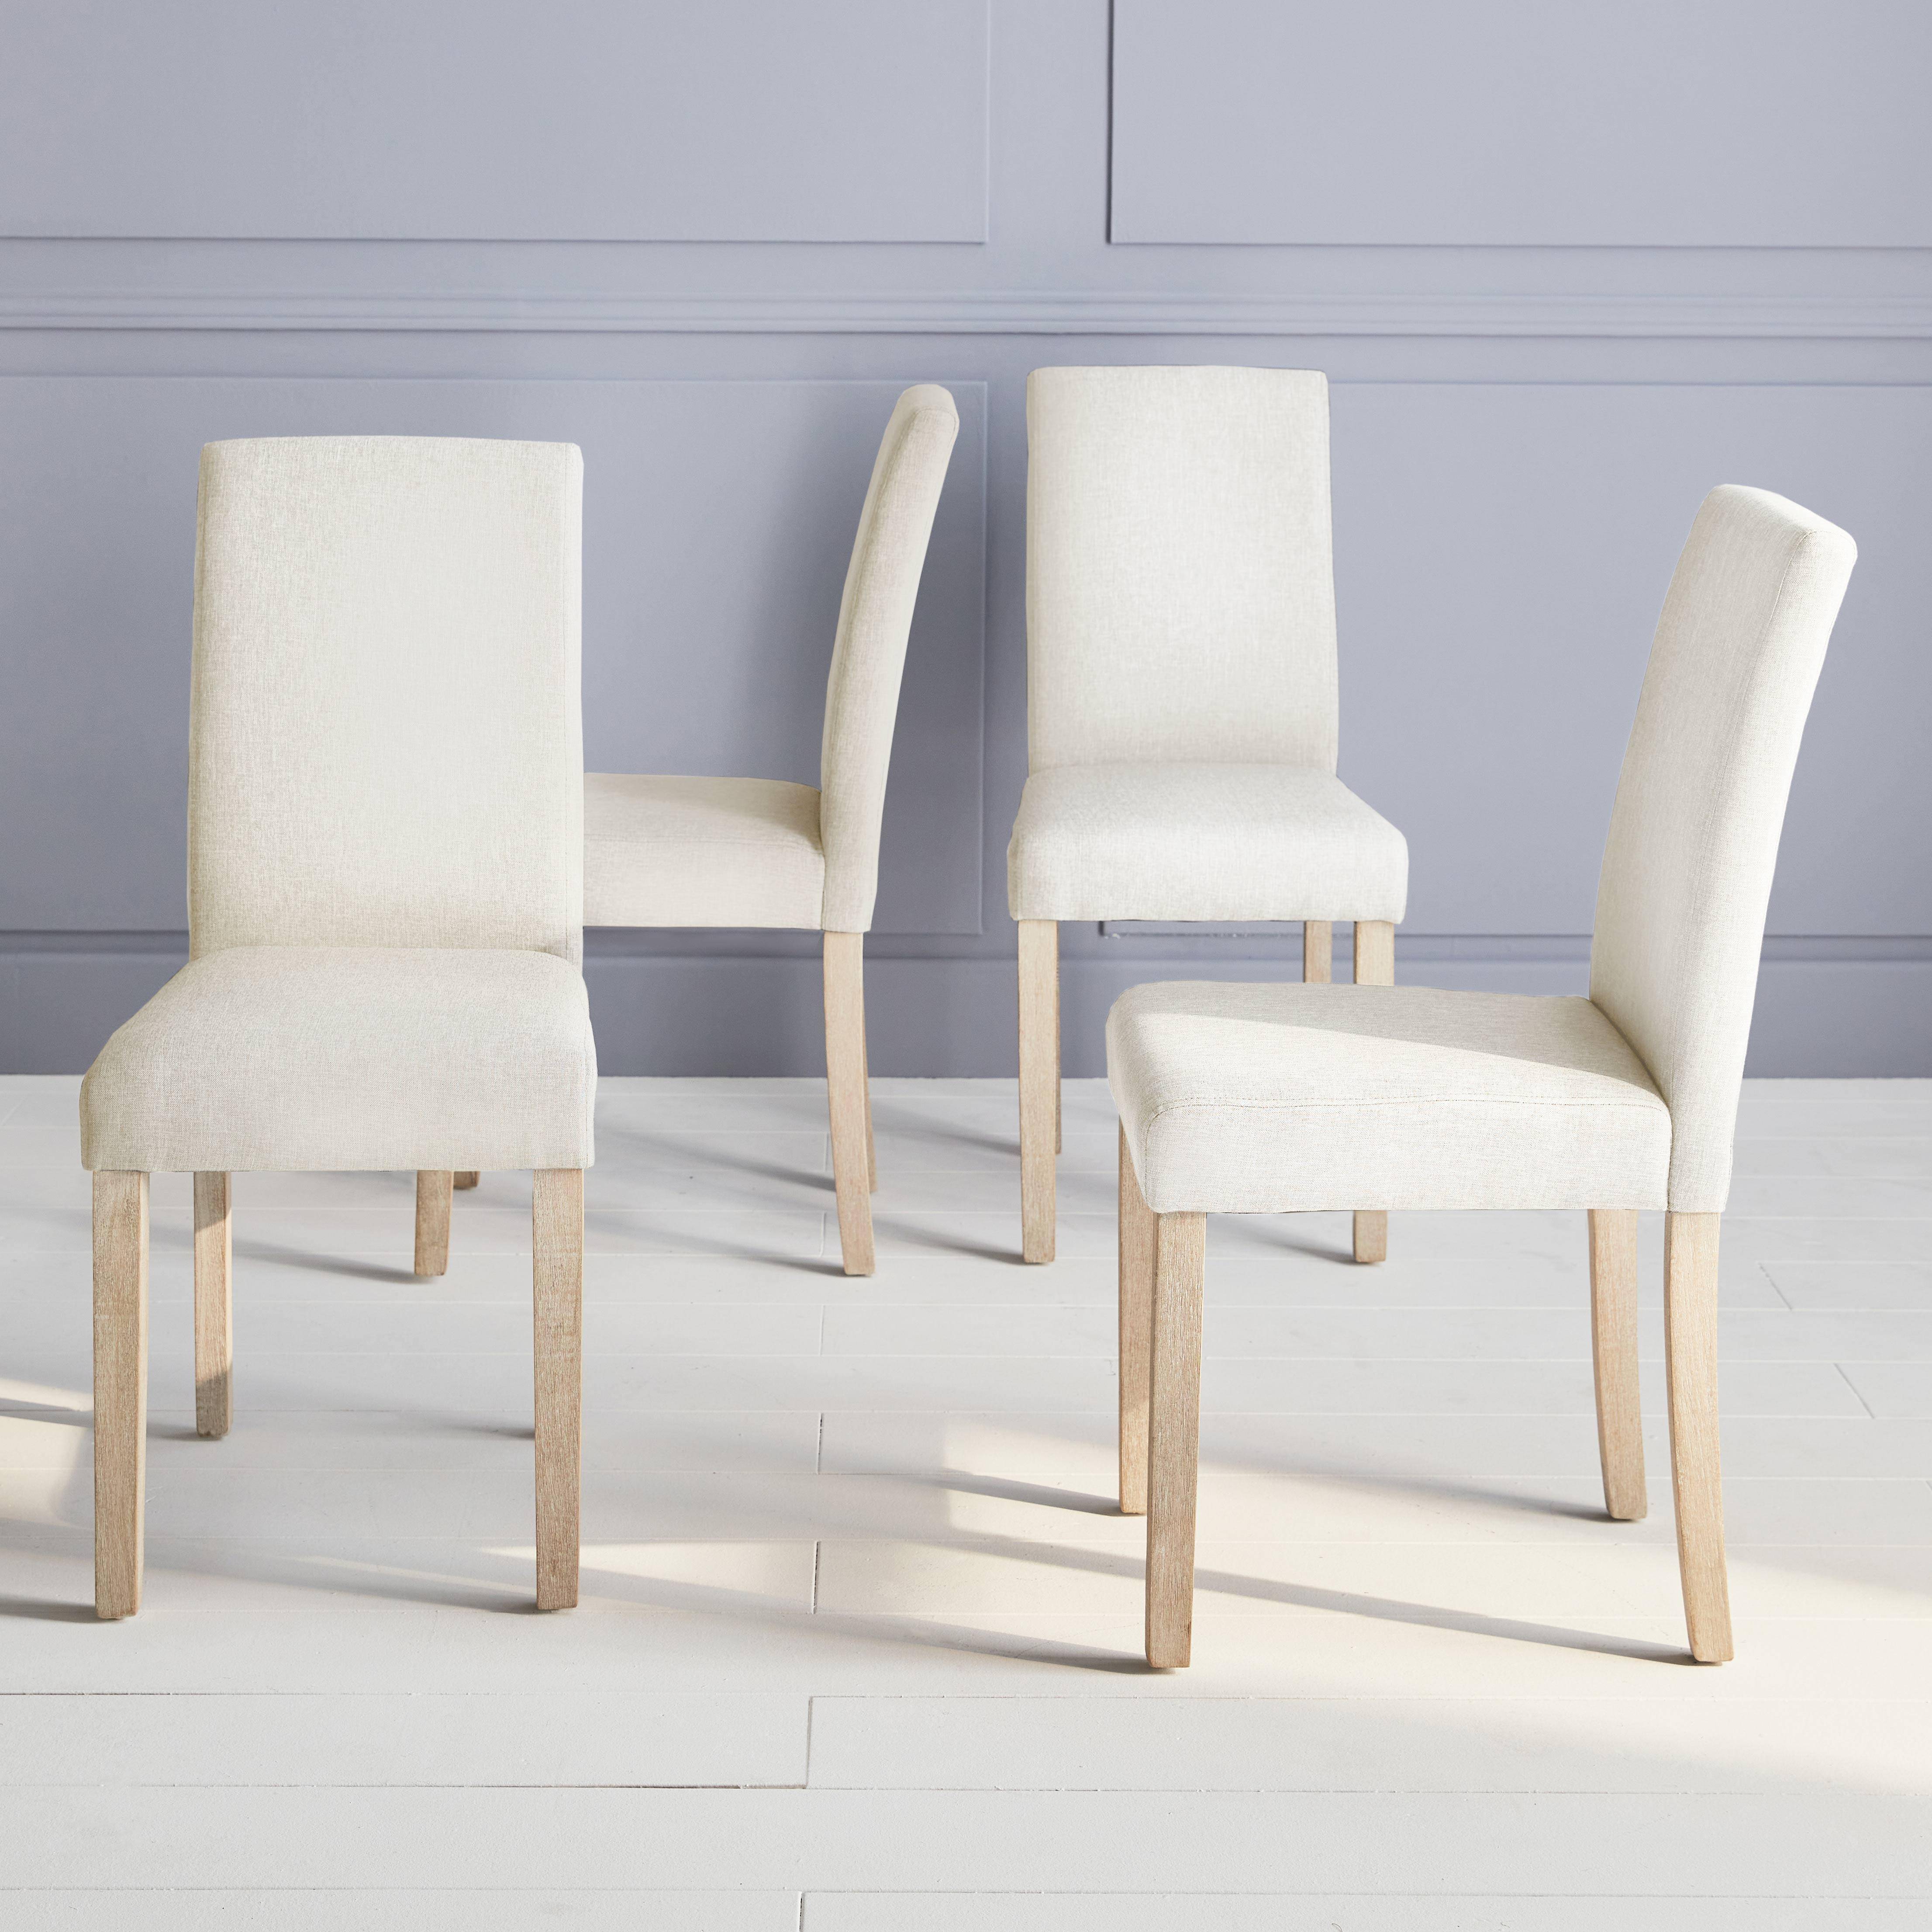 Set of 4 fabric dining chairs with wooden legs - Rita - Beige,sweeek,Photo1